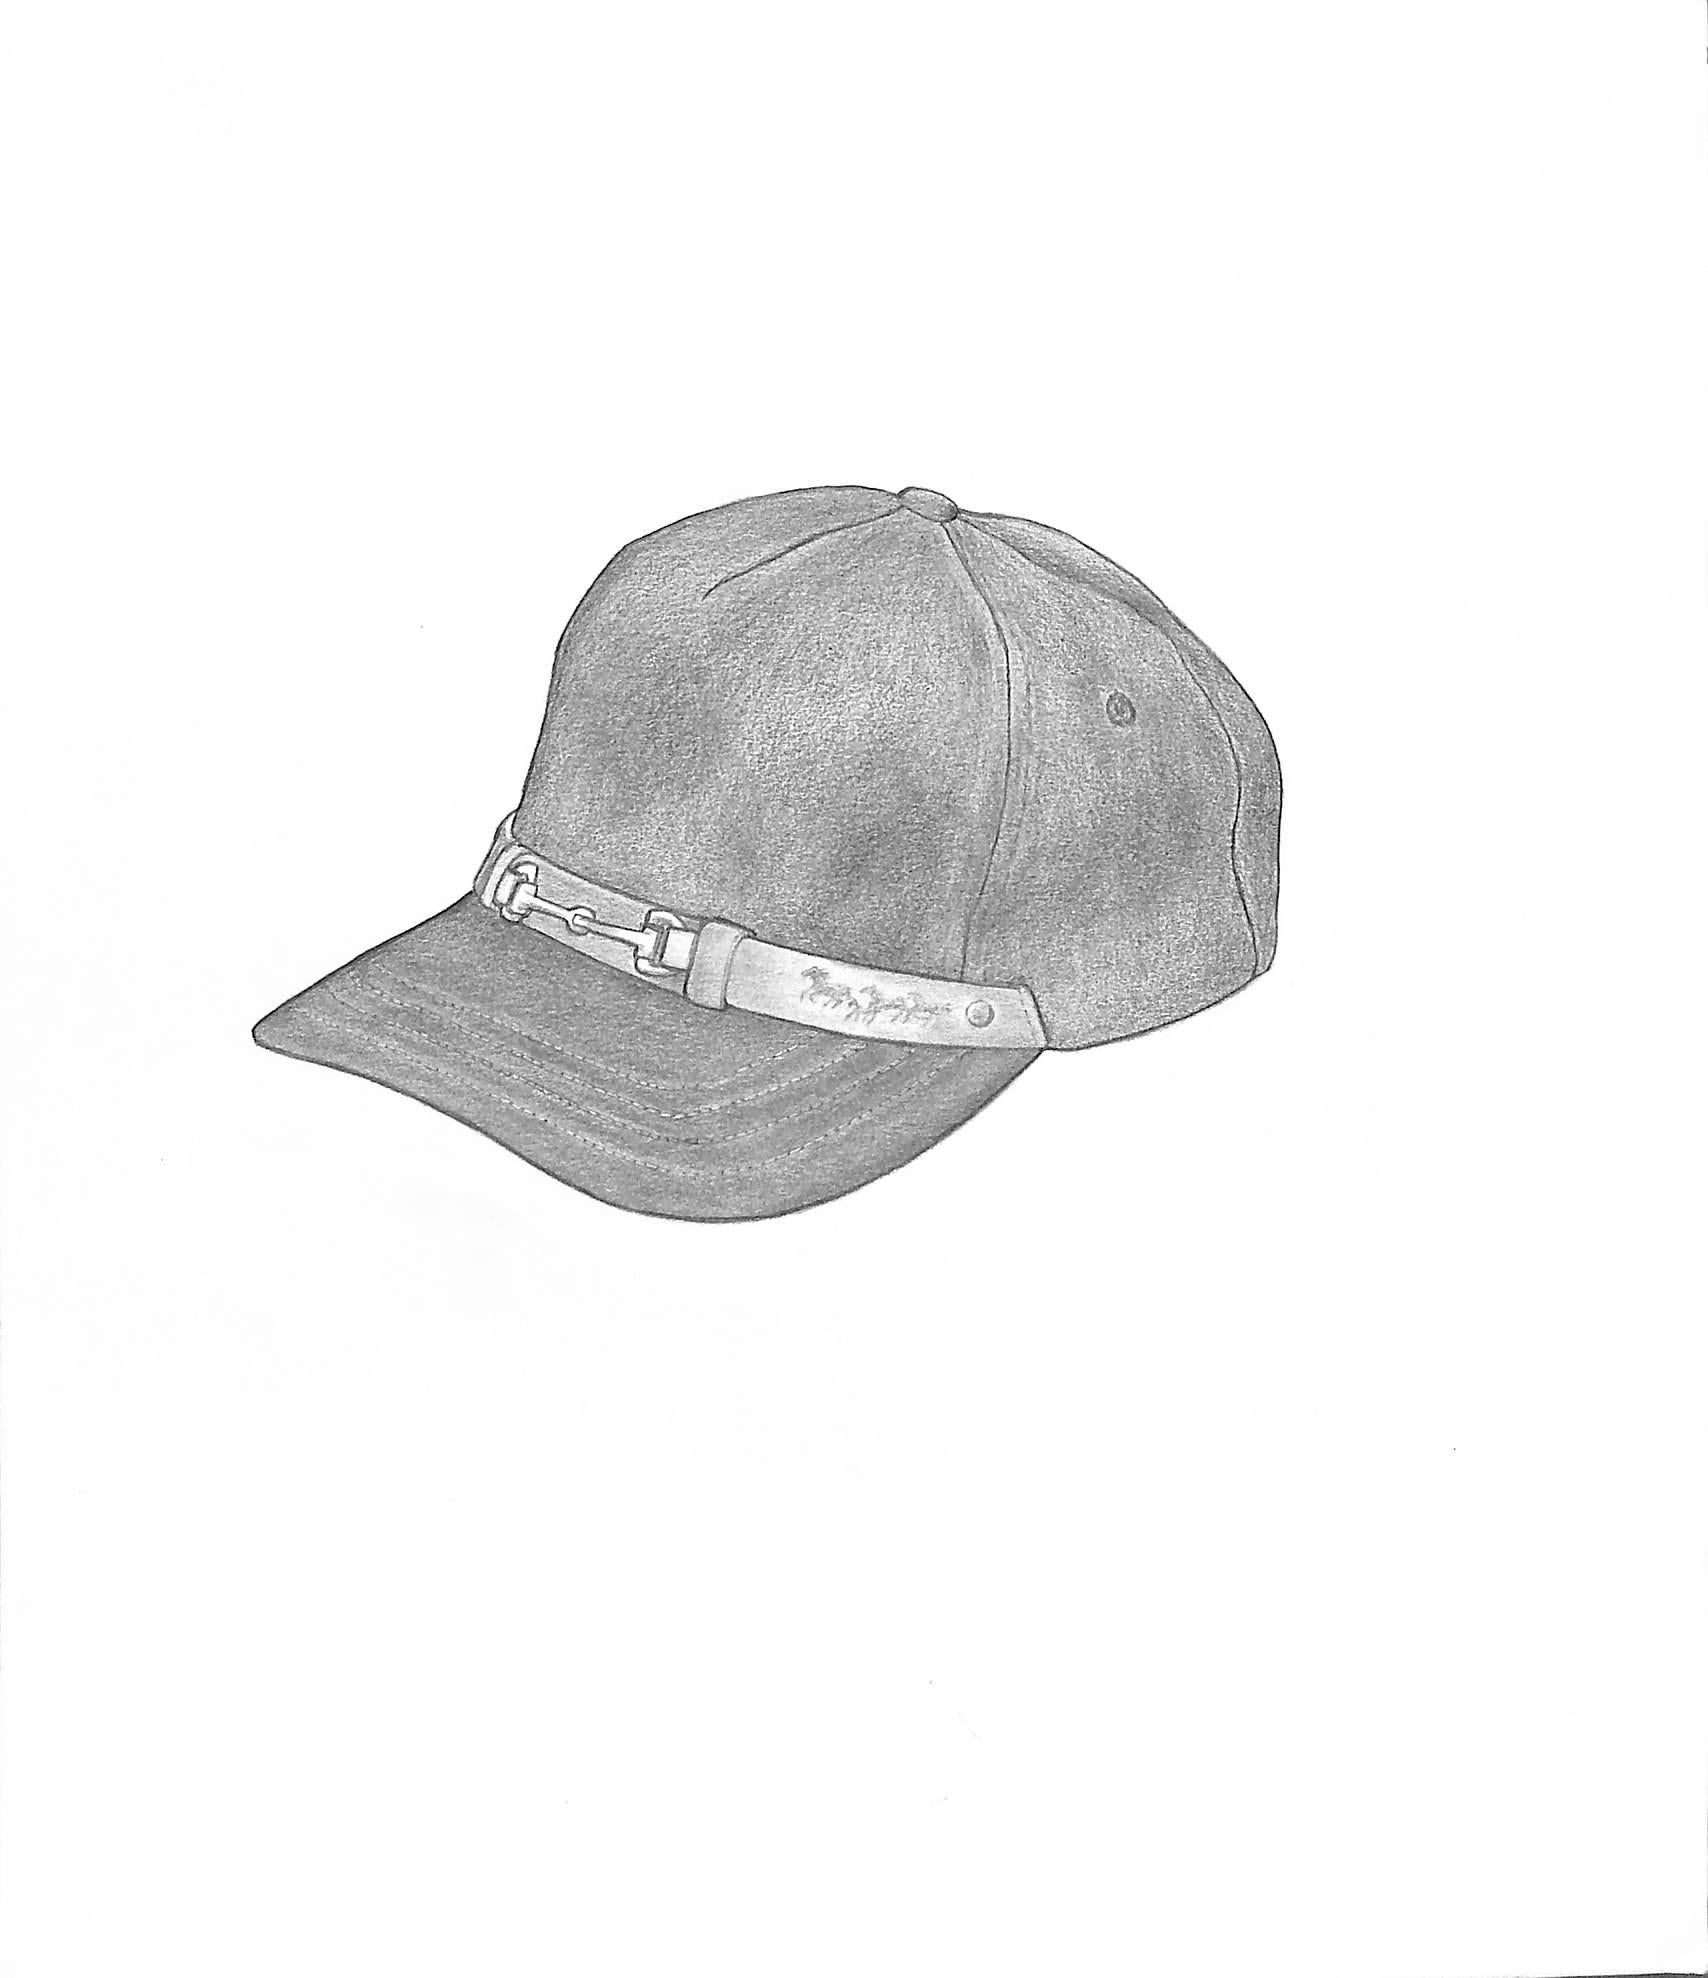 Riding Cap 2002 Graphite Drawing - Art by Unknown